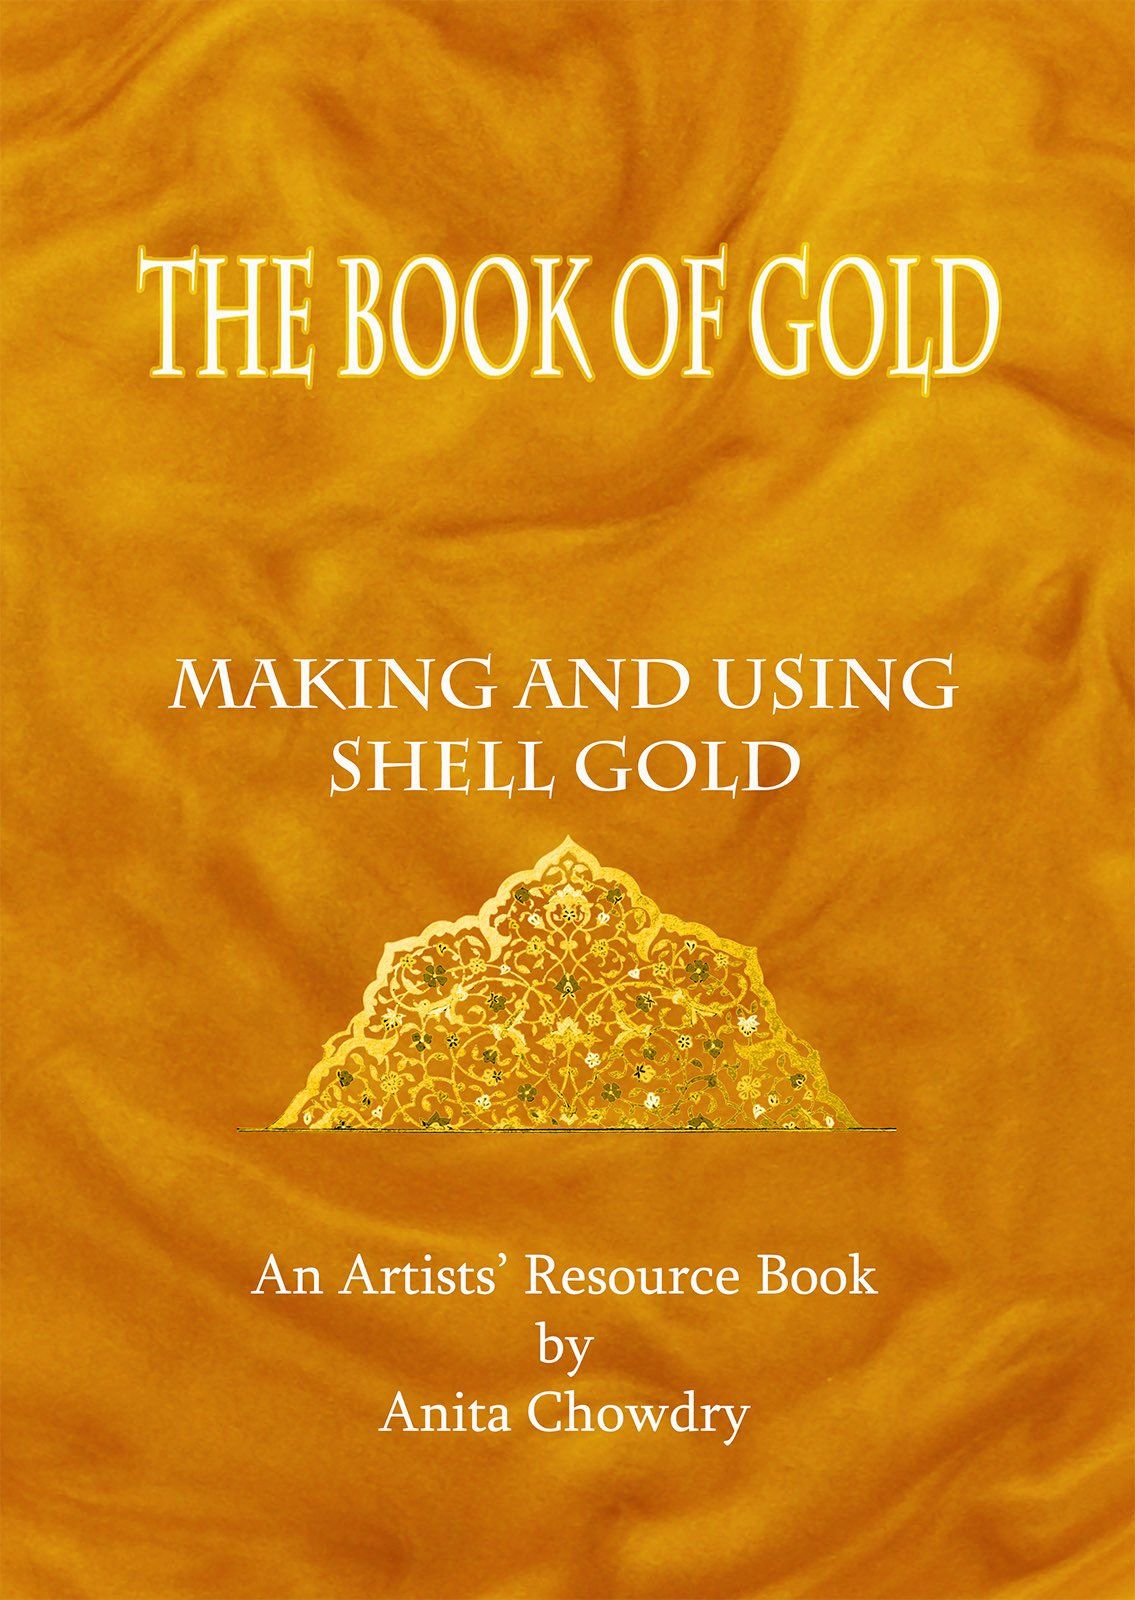 The Book of Gold by Anita Chowdry